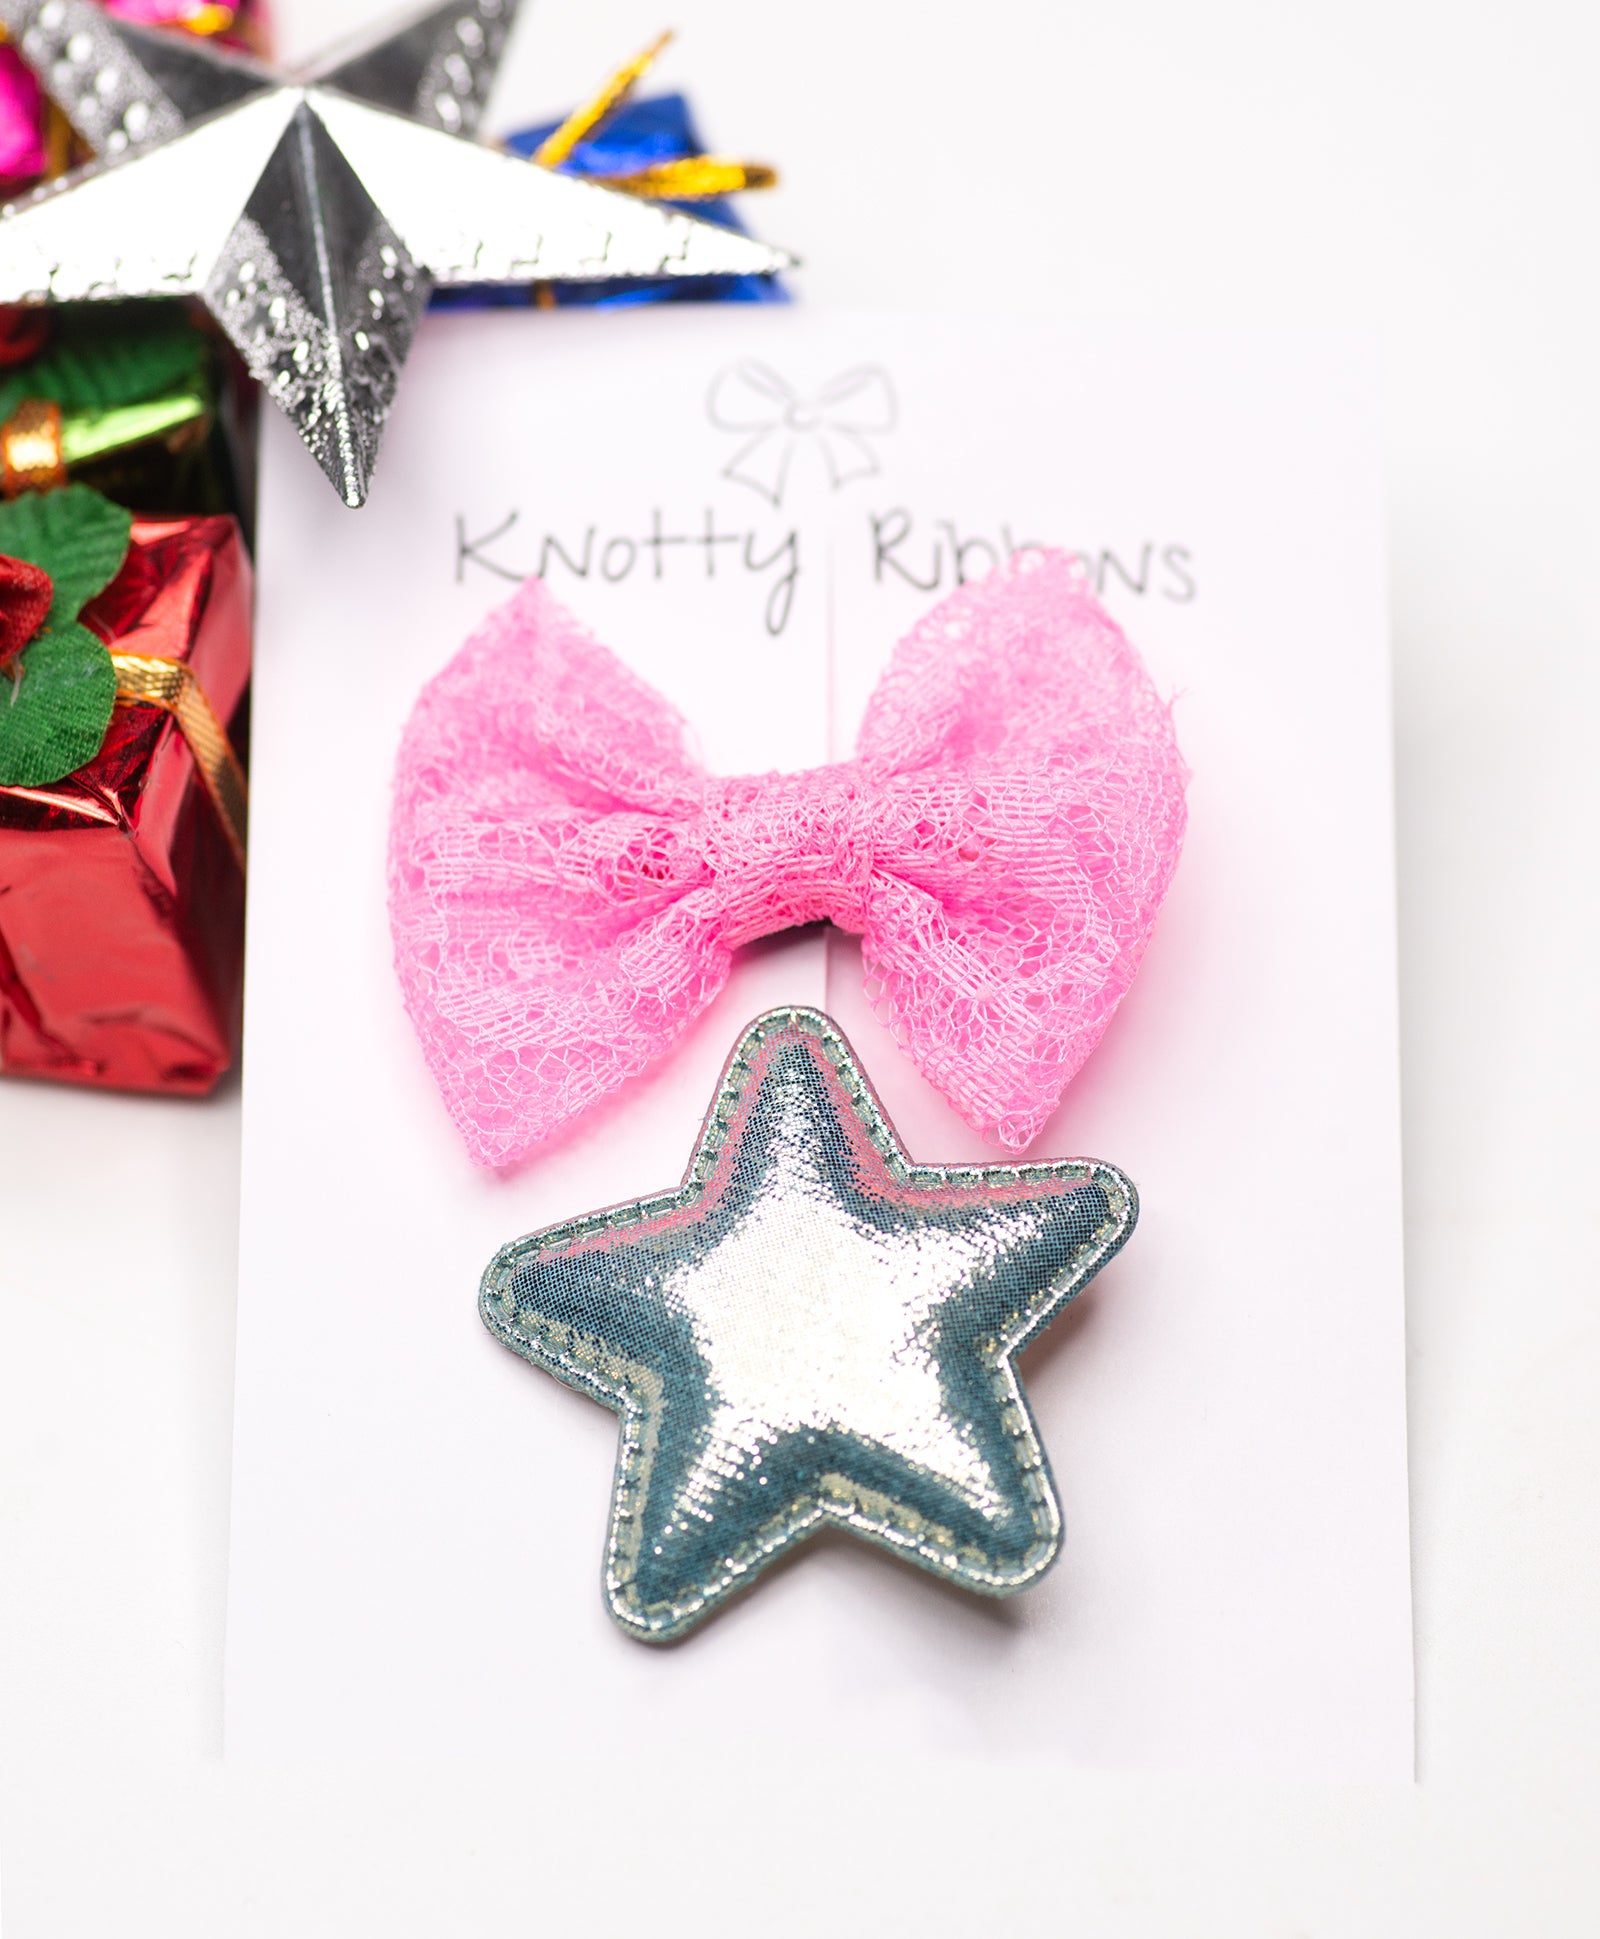 Star & Bow Alligator Hair Clips - Gray & Pink